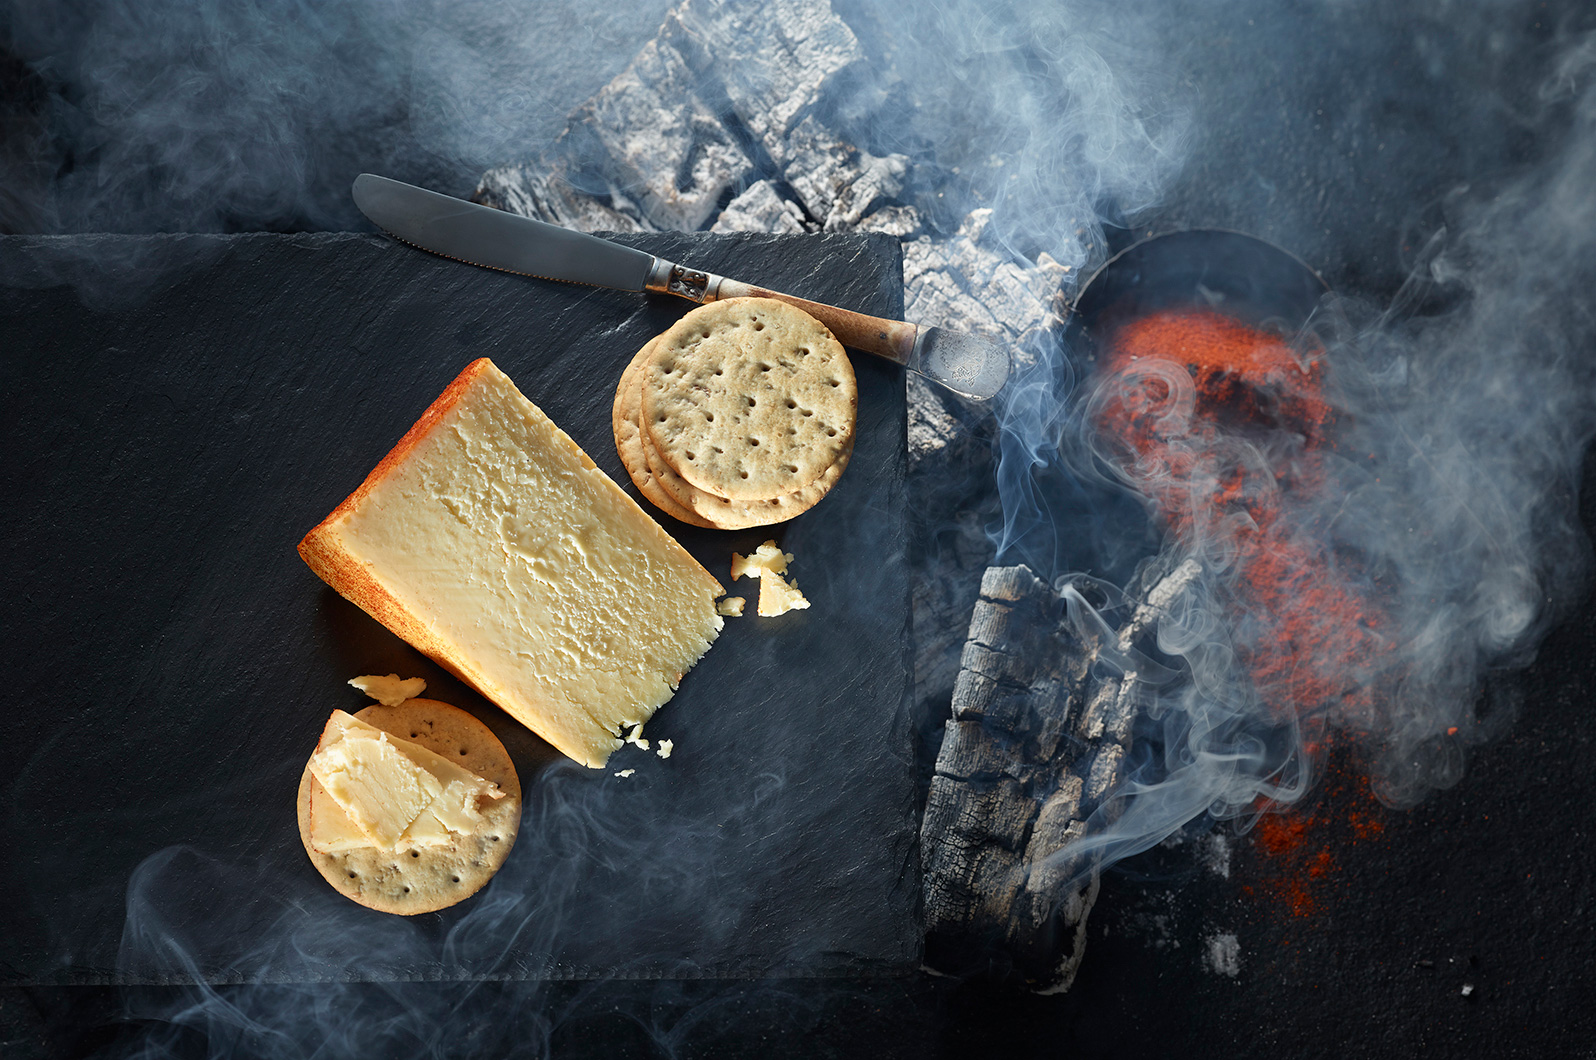 Studio images shot using burning logs to create the smoke to convey the smoked nature of the cheese.